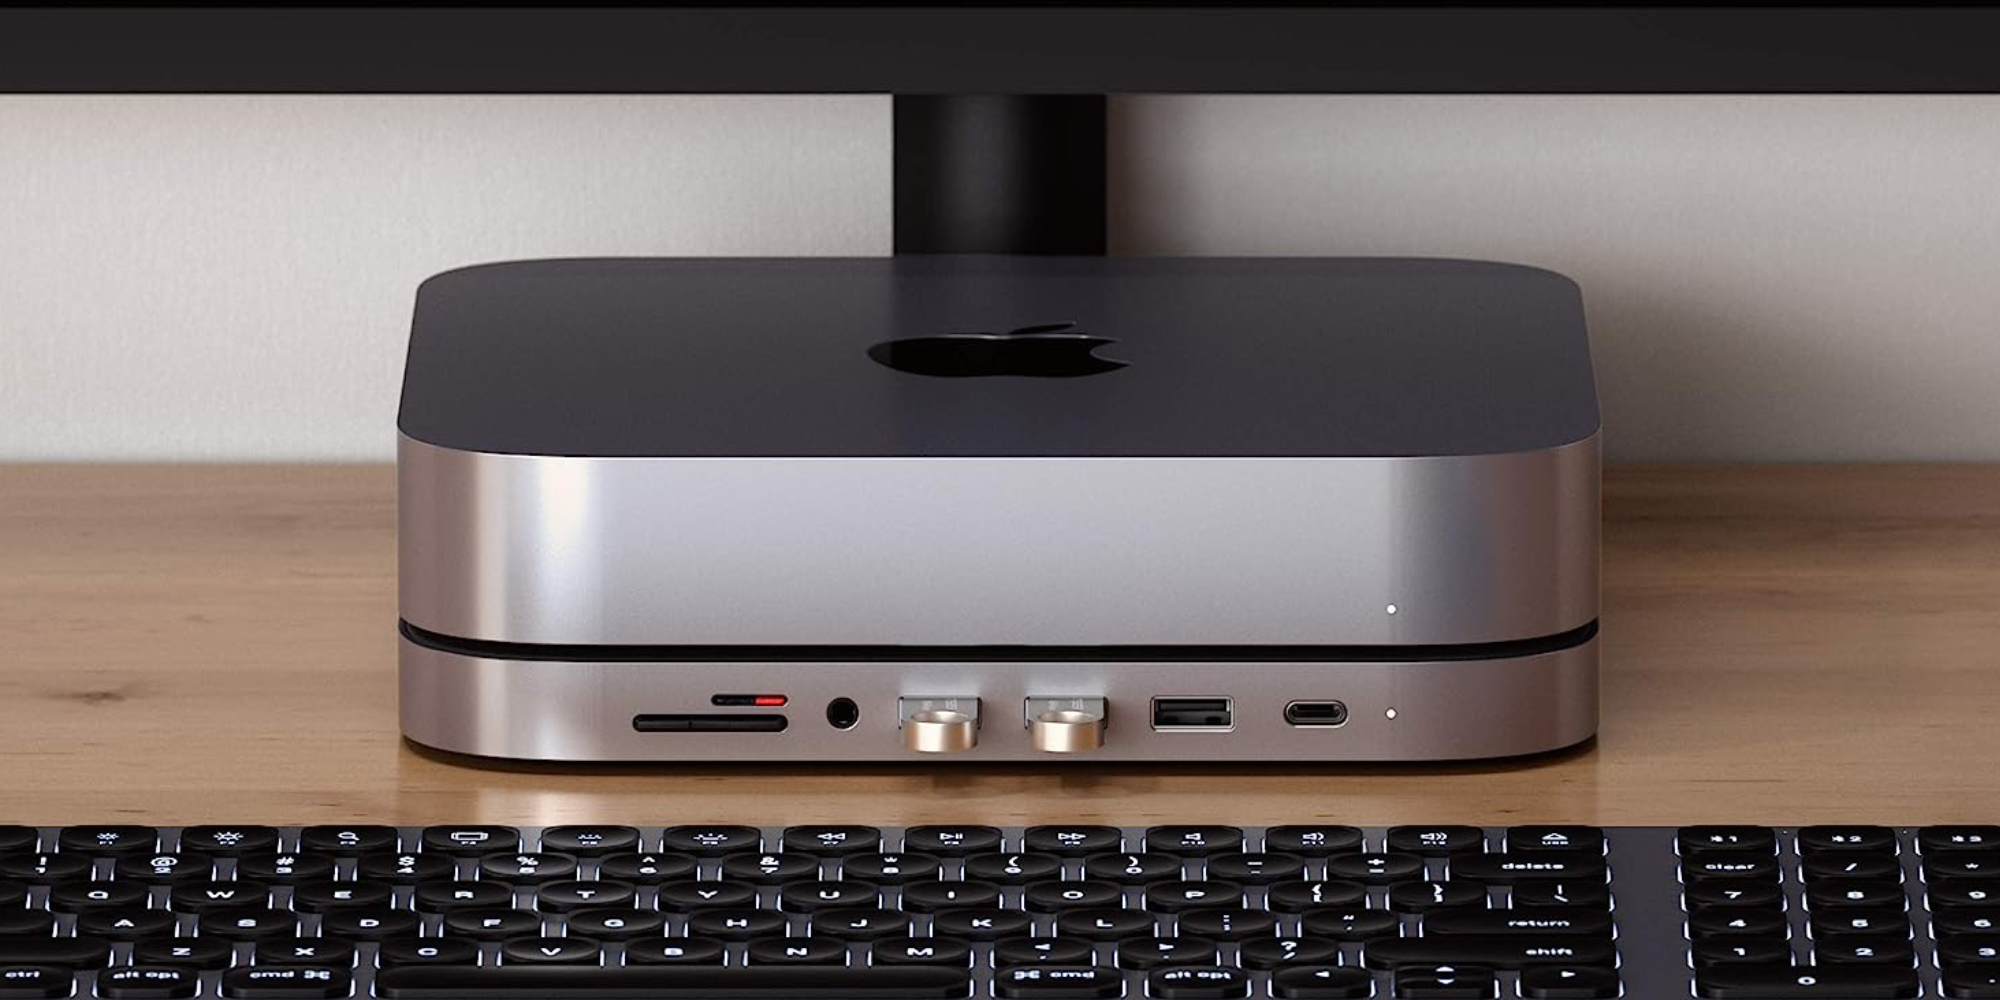 Hands-on: an awesome Mac mini hub from Satechi [Video] - 9to5Mac